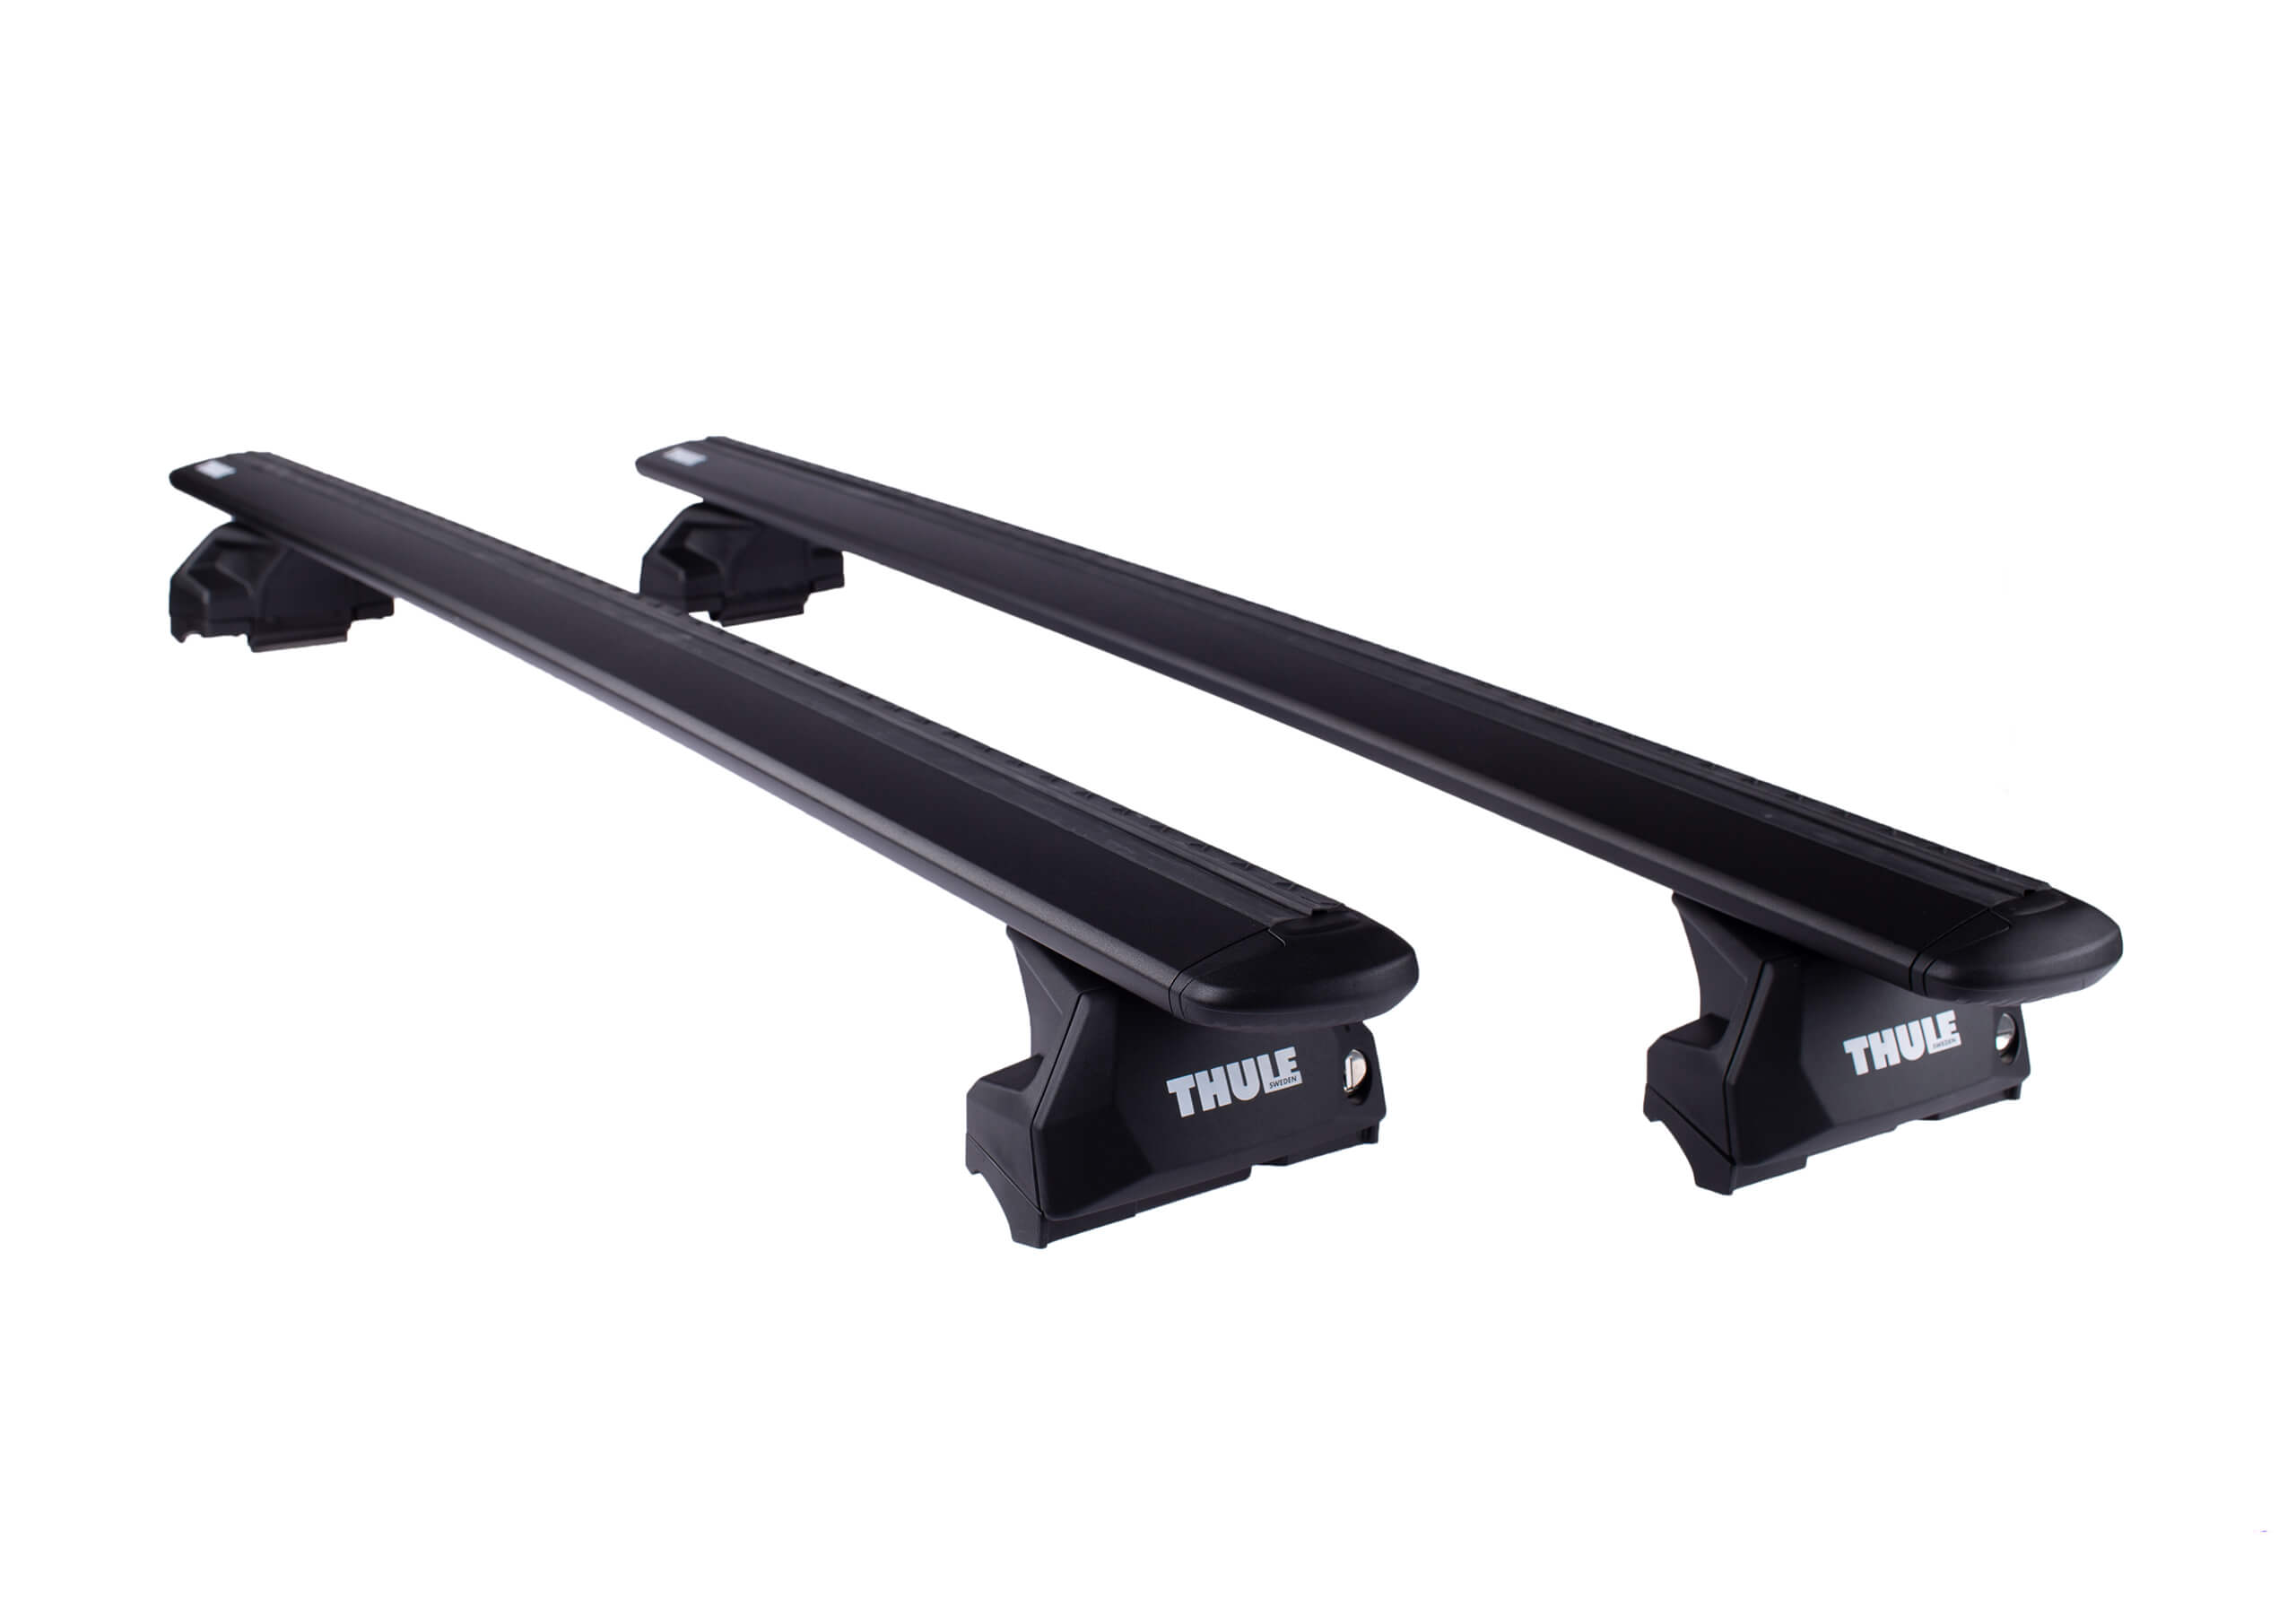 BMW 3 series Touring (2012 to 2019):Thule black WingBars package - 7106, 7112B, 6007